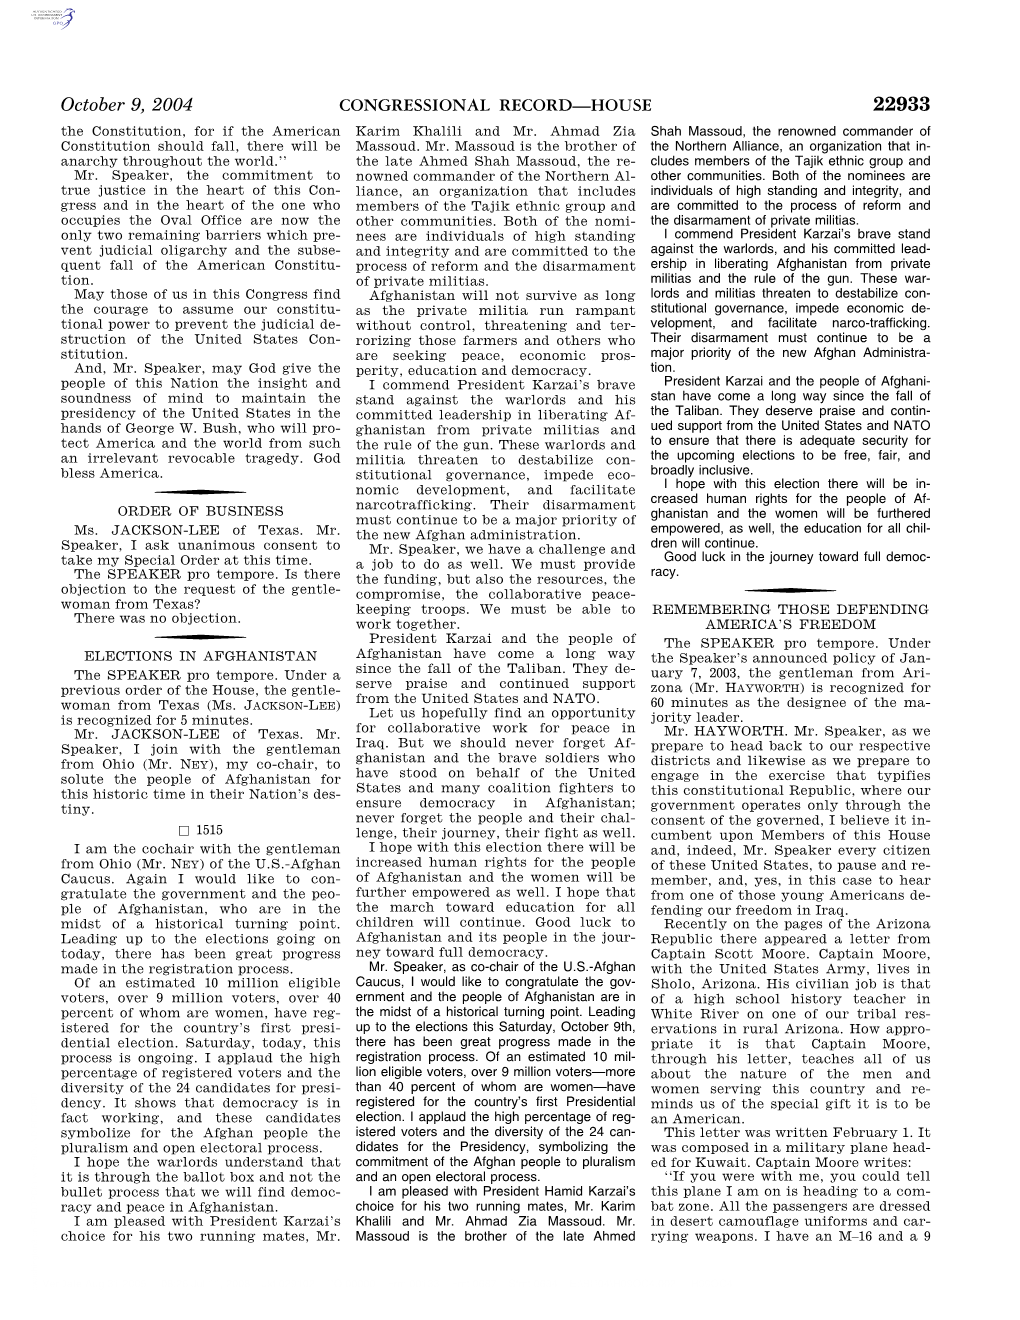 CONGRESSIONAL RECORD—HOUSE October 9, 2004